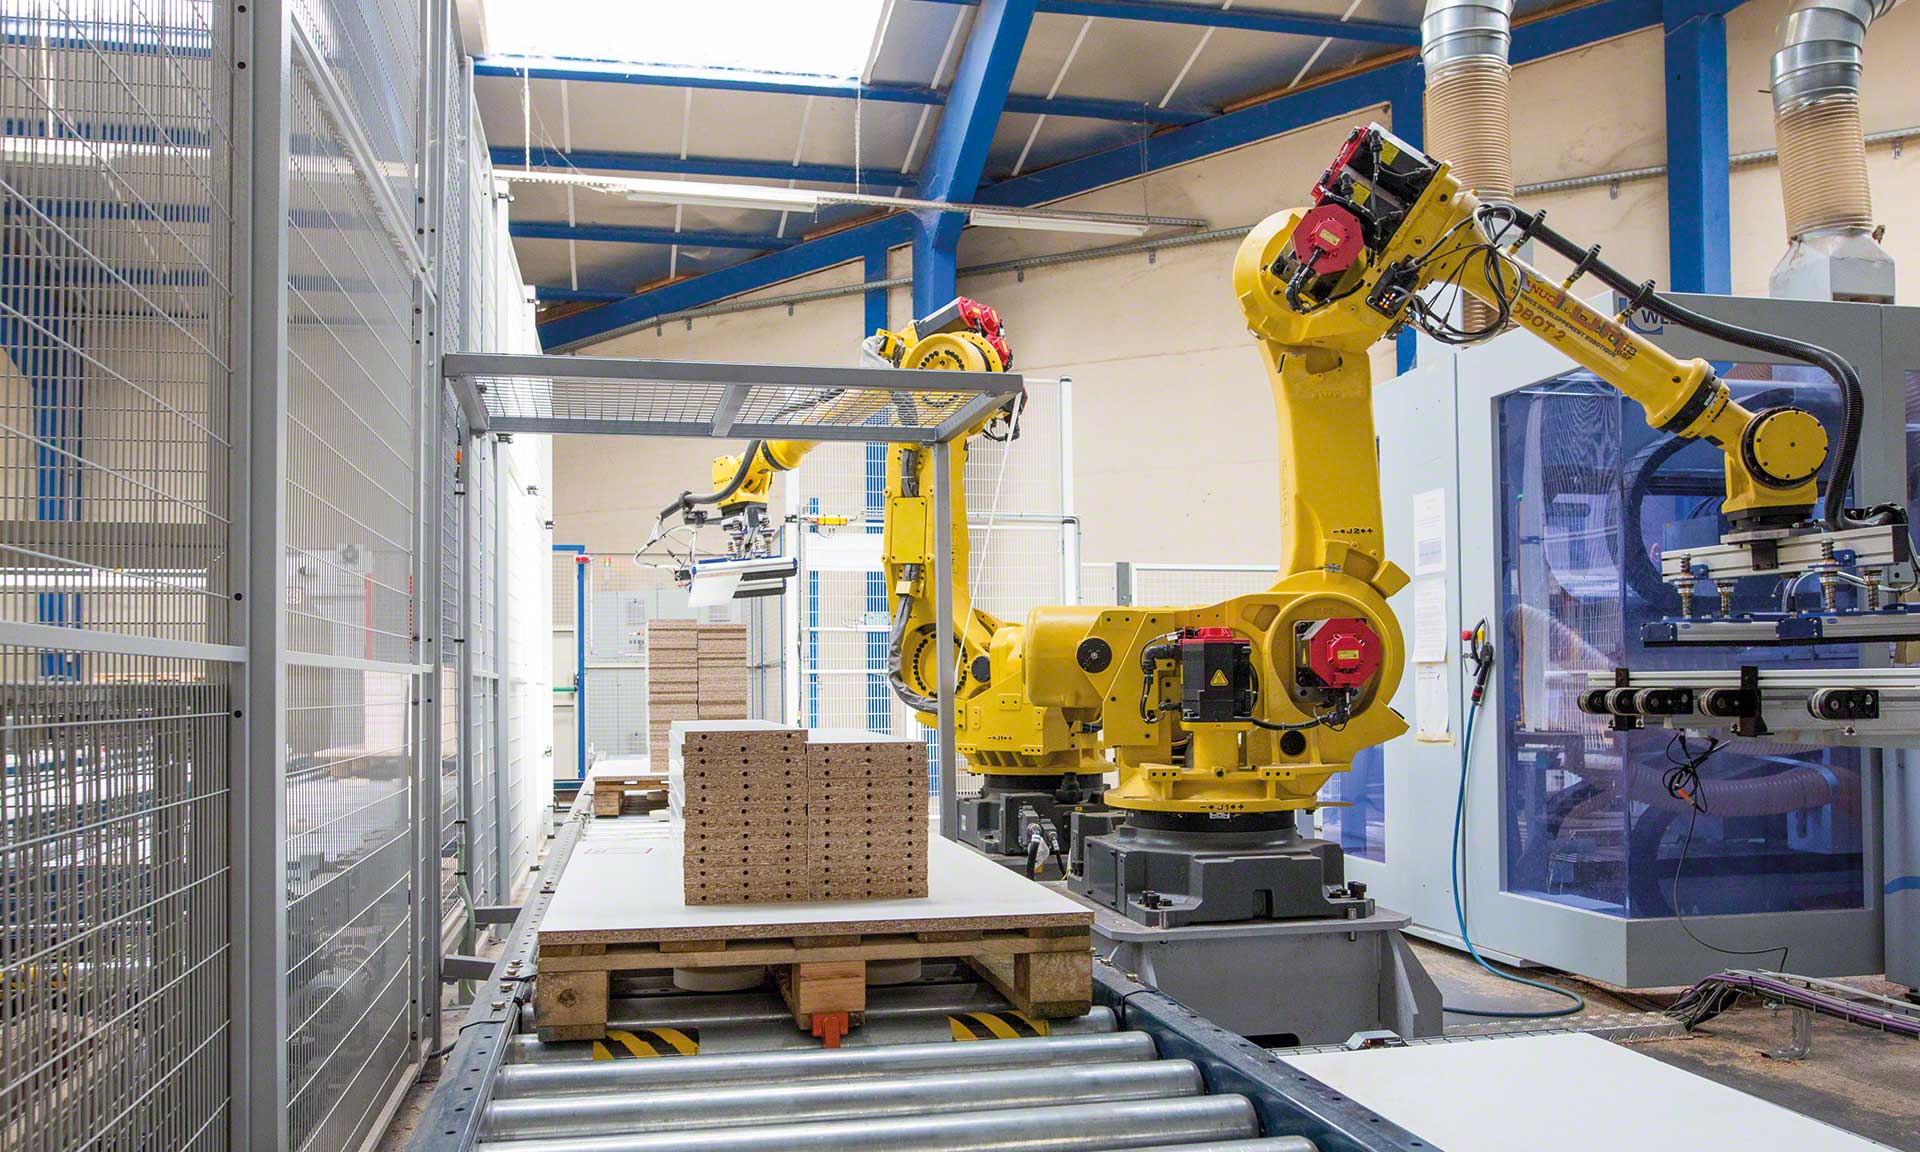 Warehousing and Logistics sector to undergo a rebirth with the deployment of industrial robots.